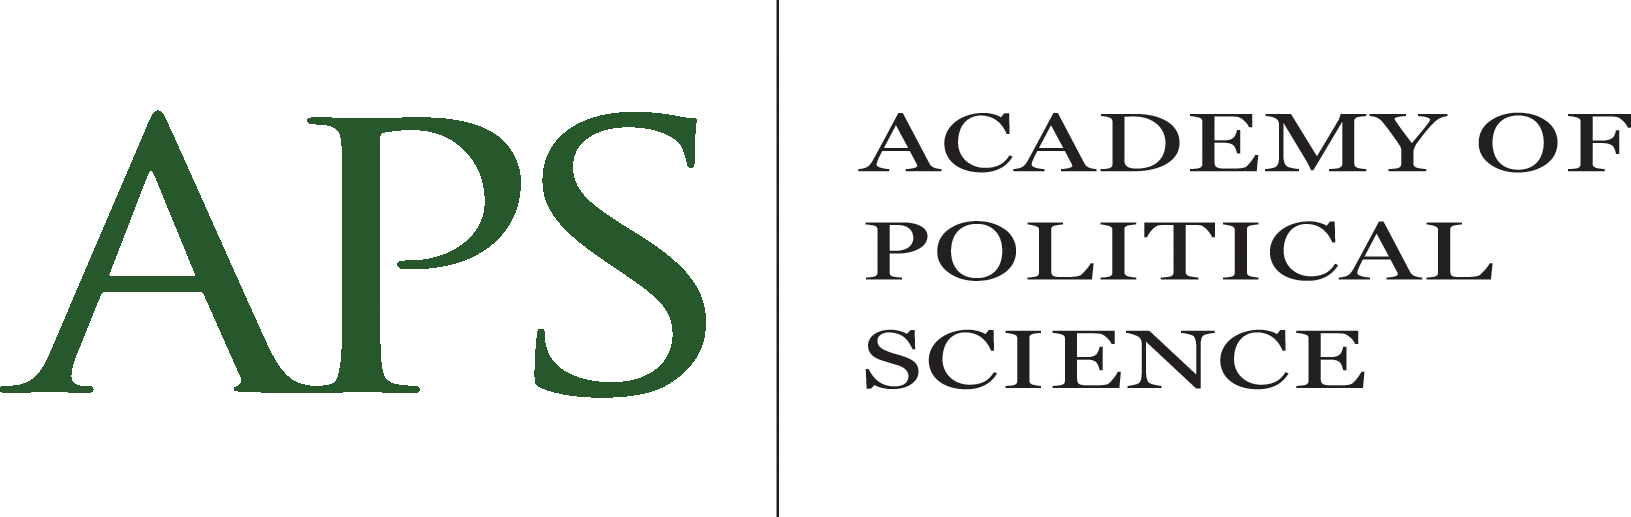 Academy of Political Science